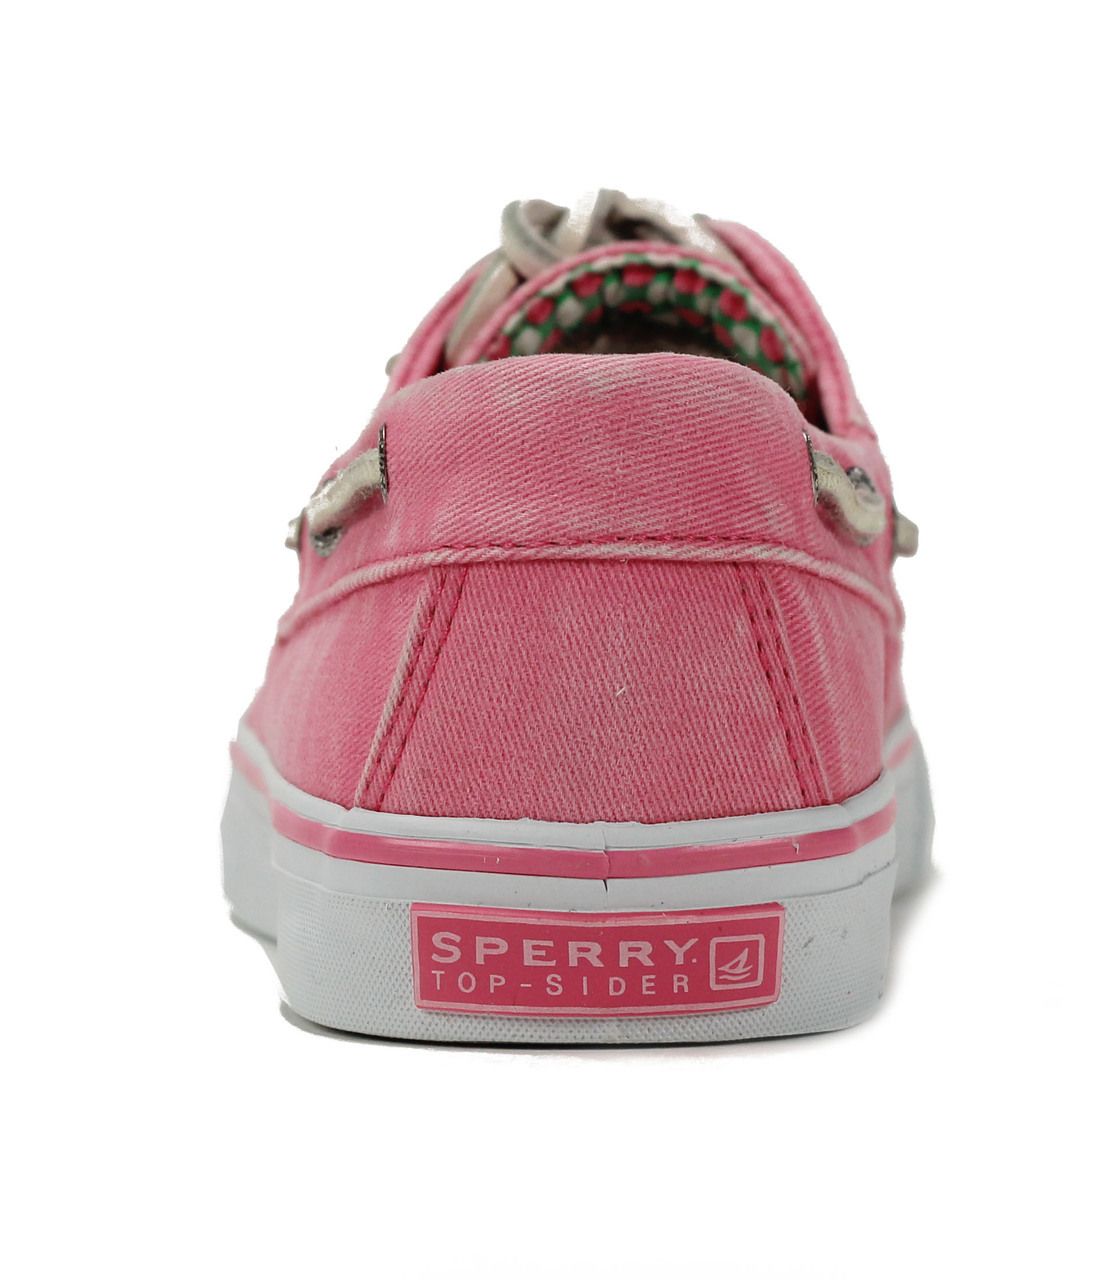 SPERRY TOP-SIDER Sperry Topsider for Women: Bahama Canvas Boat Shoe ...